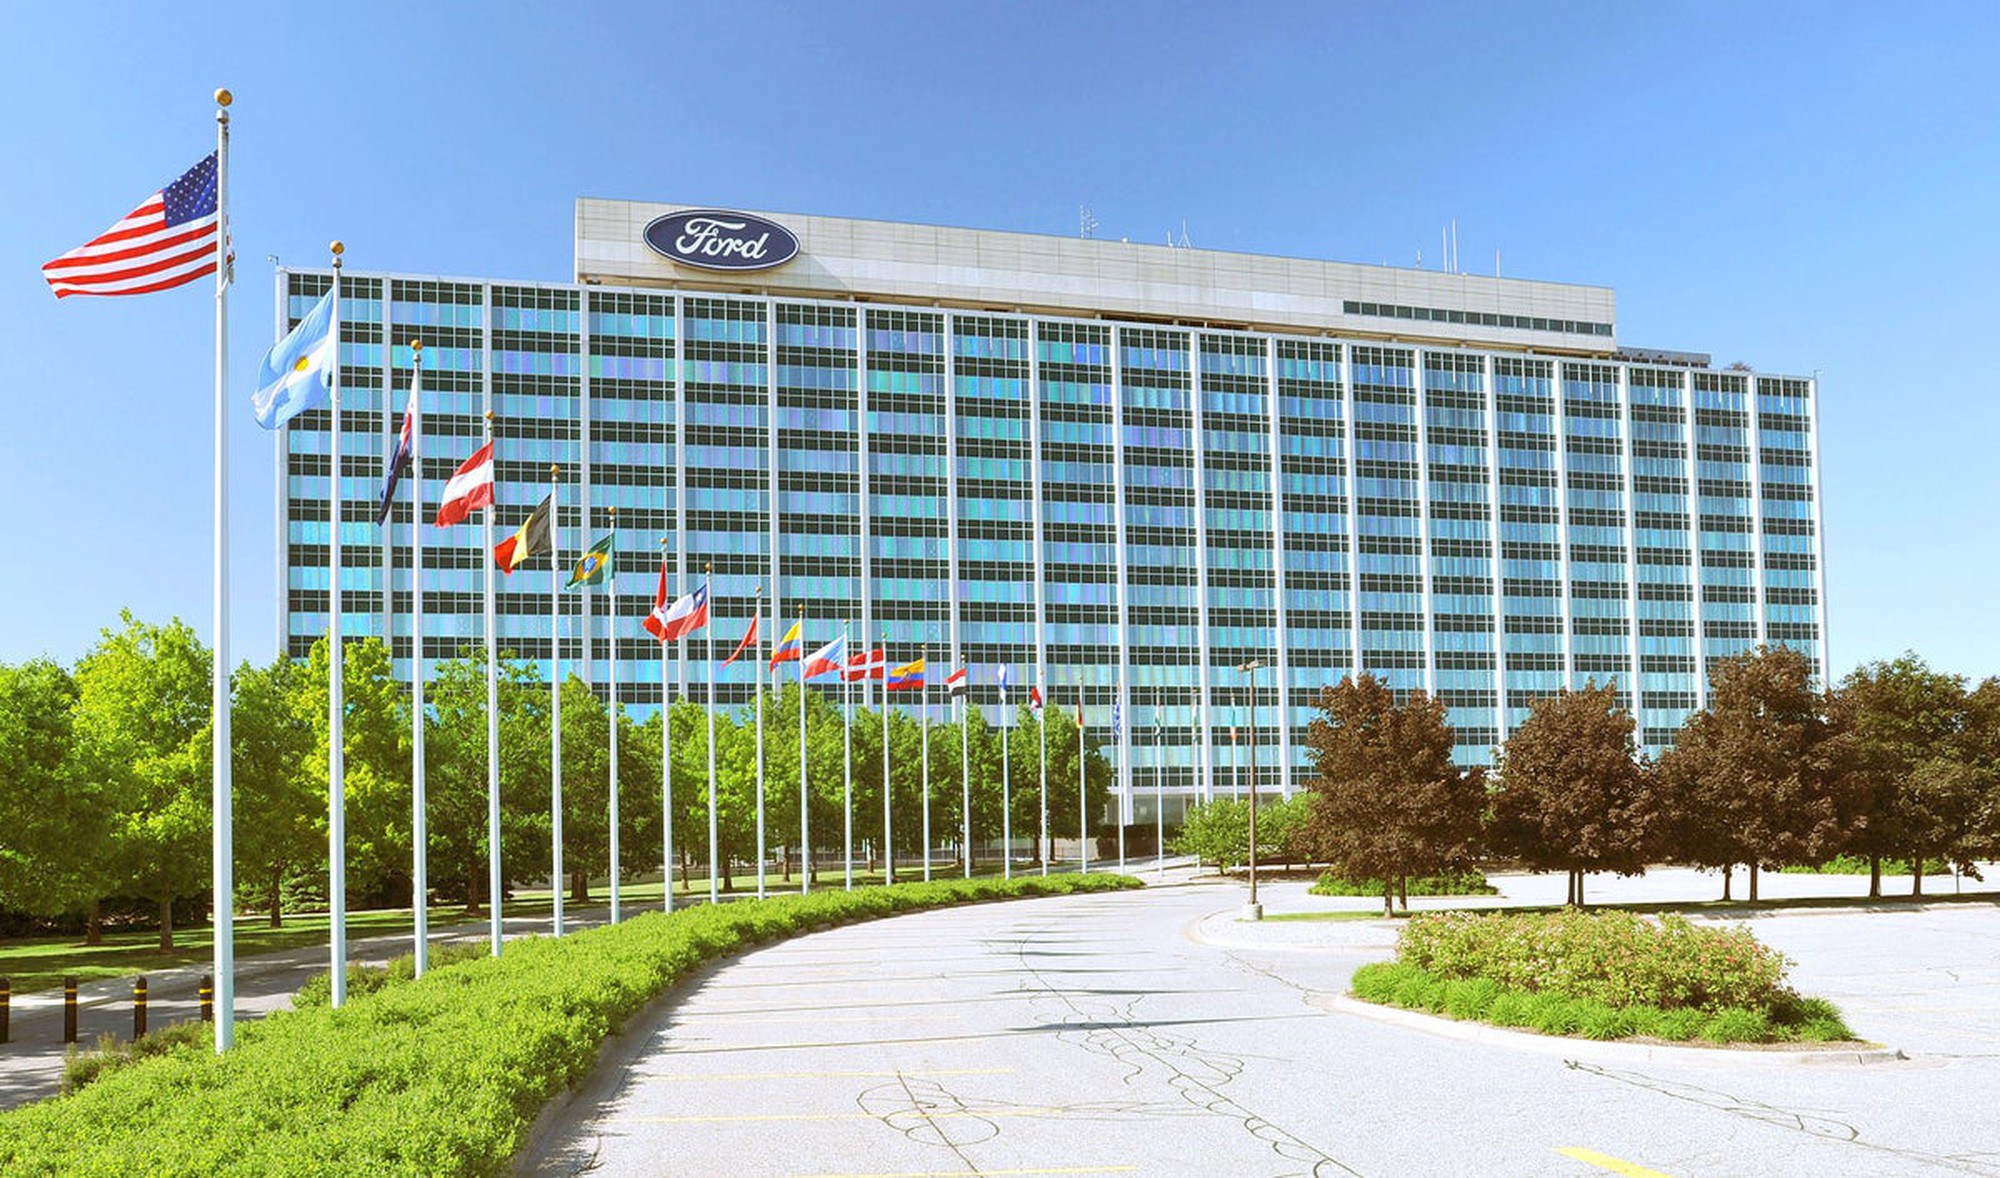  Ford is investing in electric vehicles